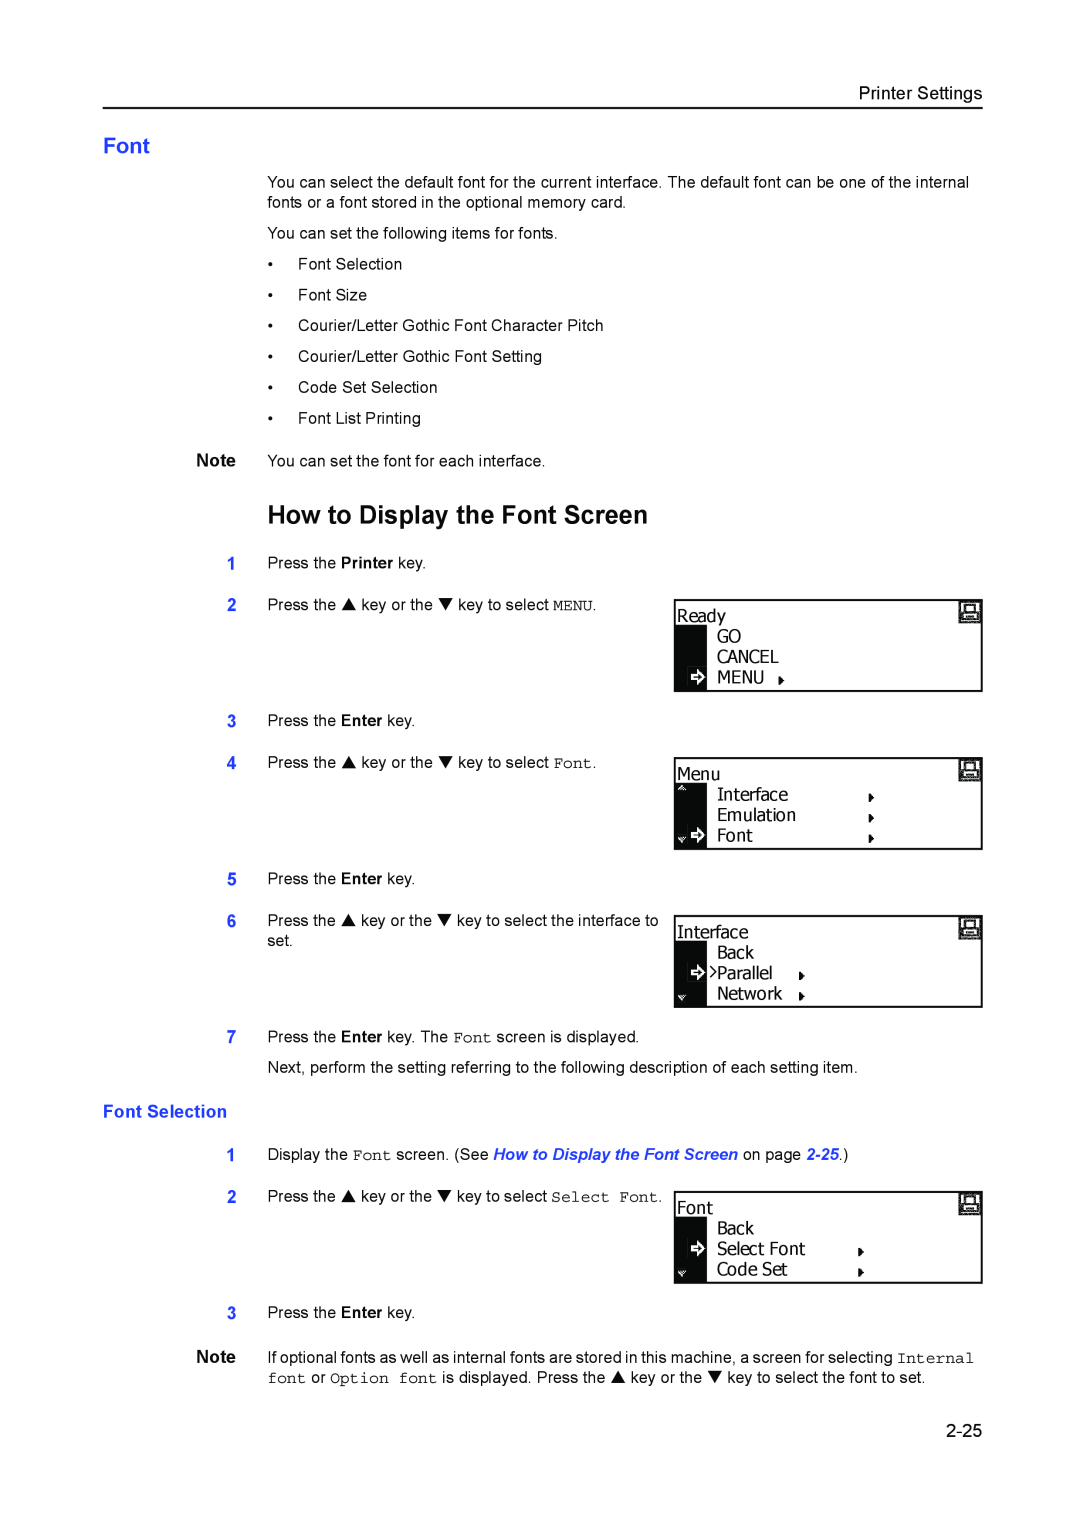 Kyocera 2550, 2050, 1650 manual How to Display the Font Screen, Font Selection, 2-25, Printer Settings 